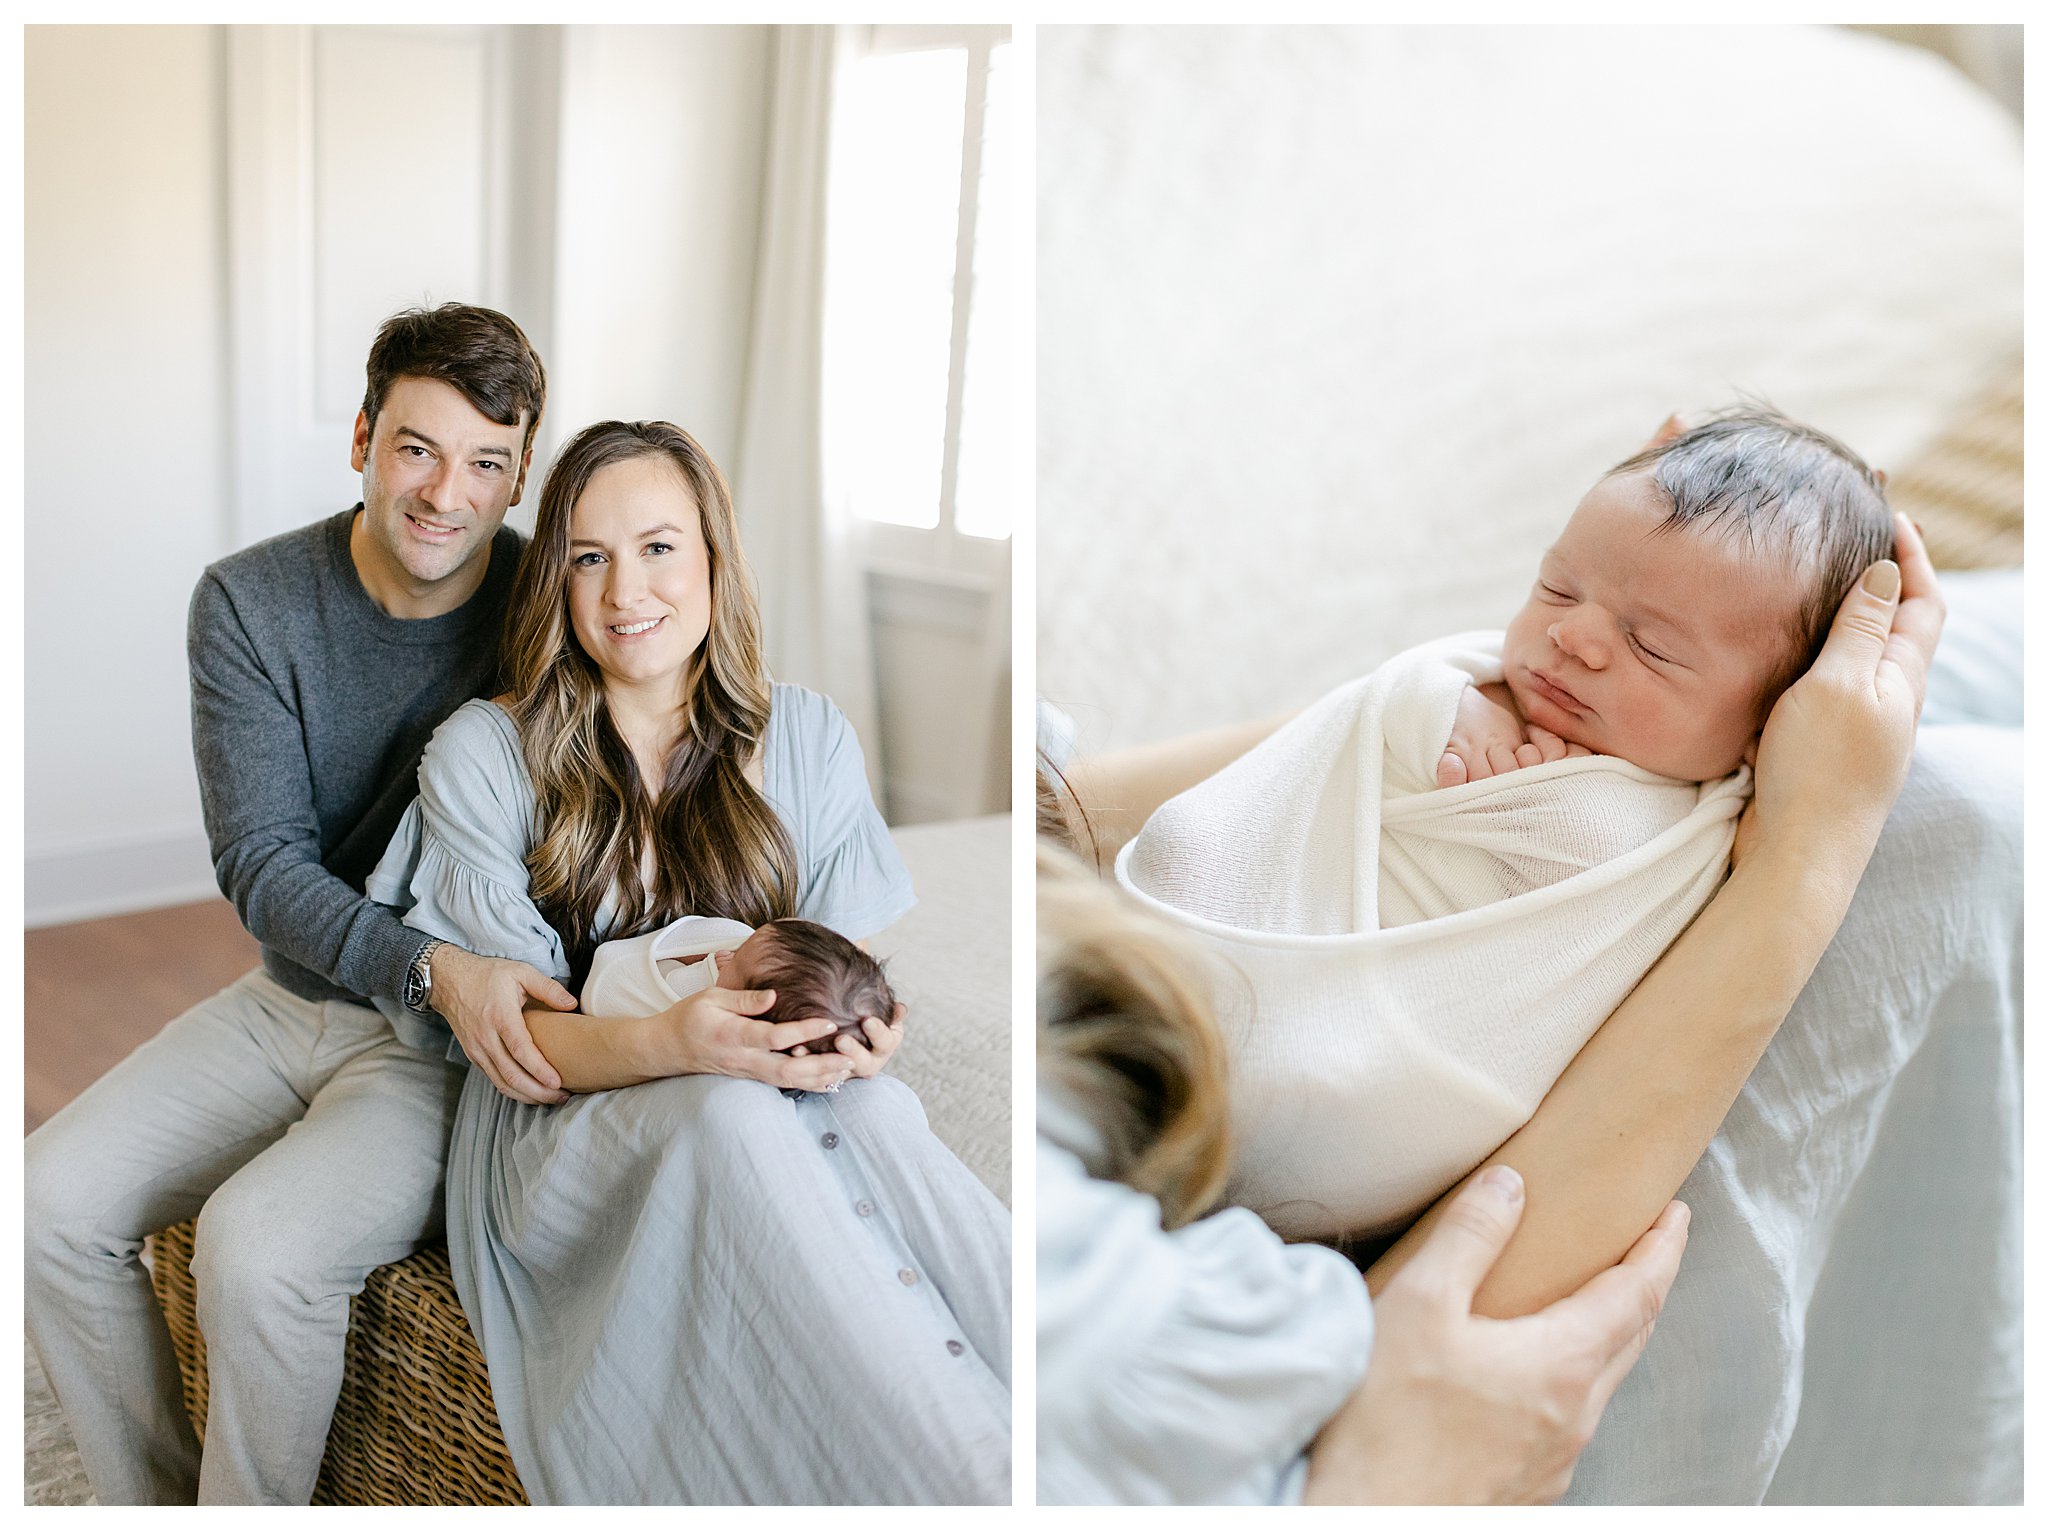 Haddonfield NJ Family during their In Home Newborn Session with Tara Federico Photography